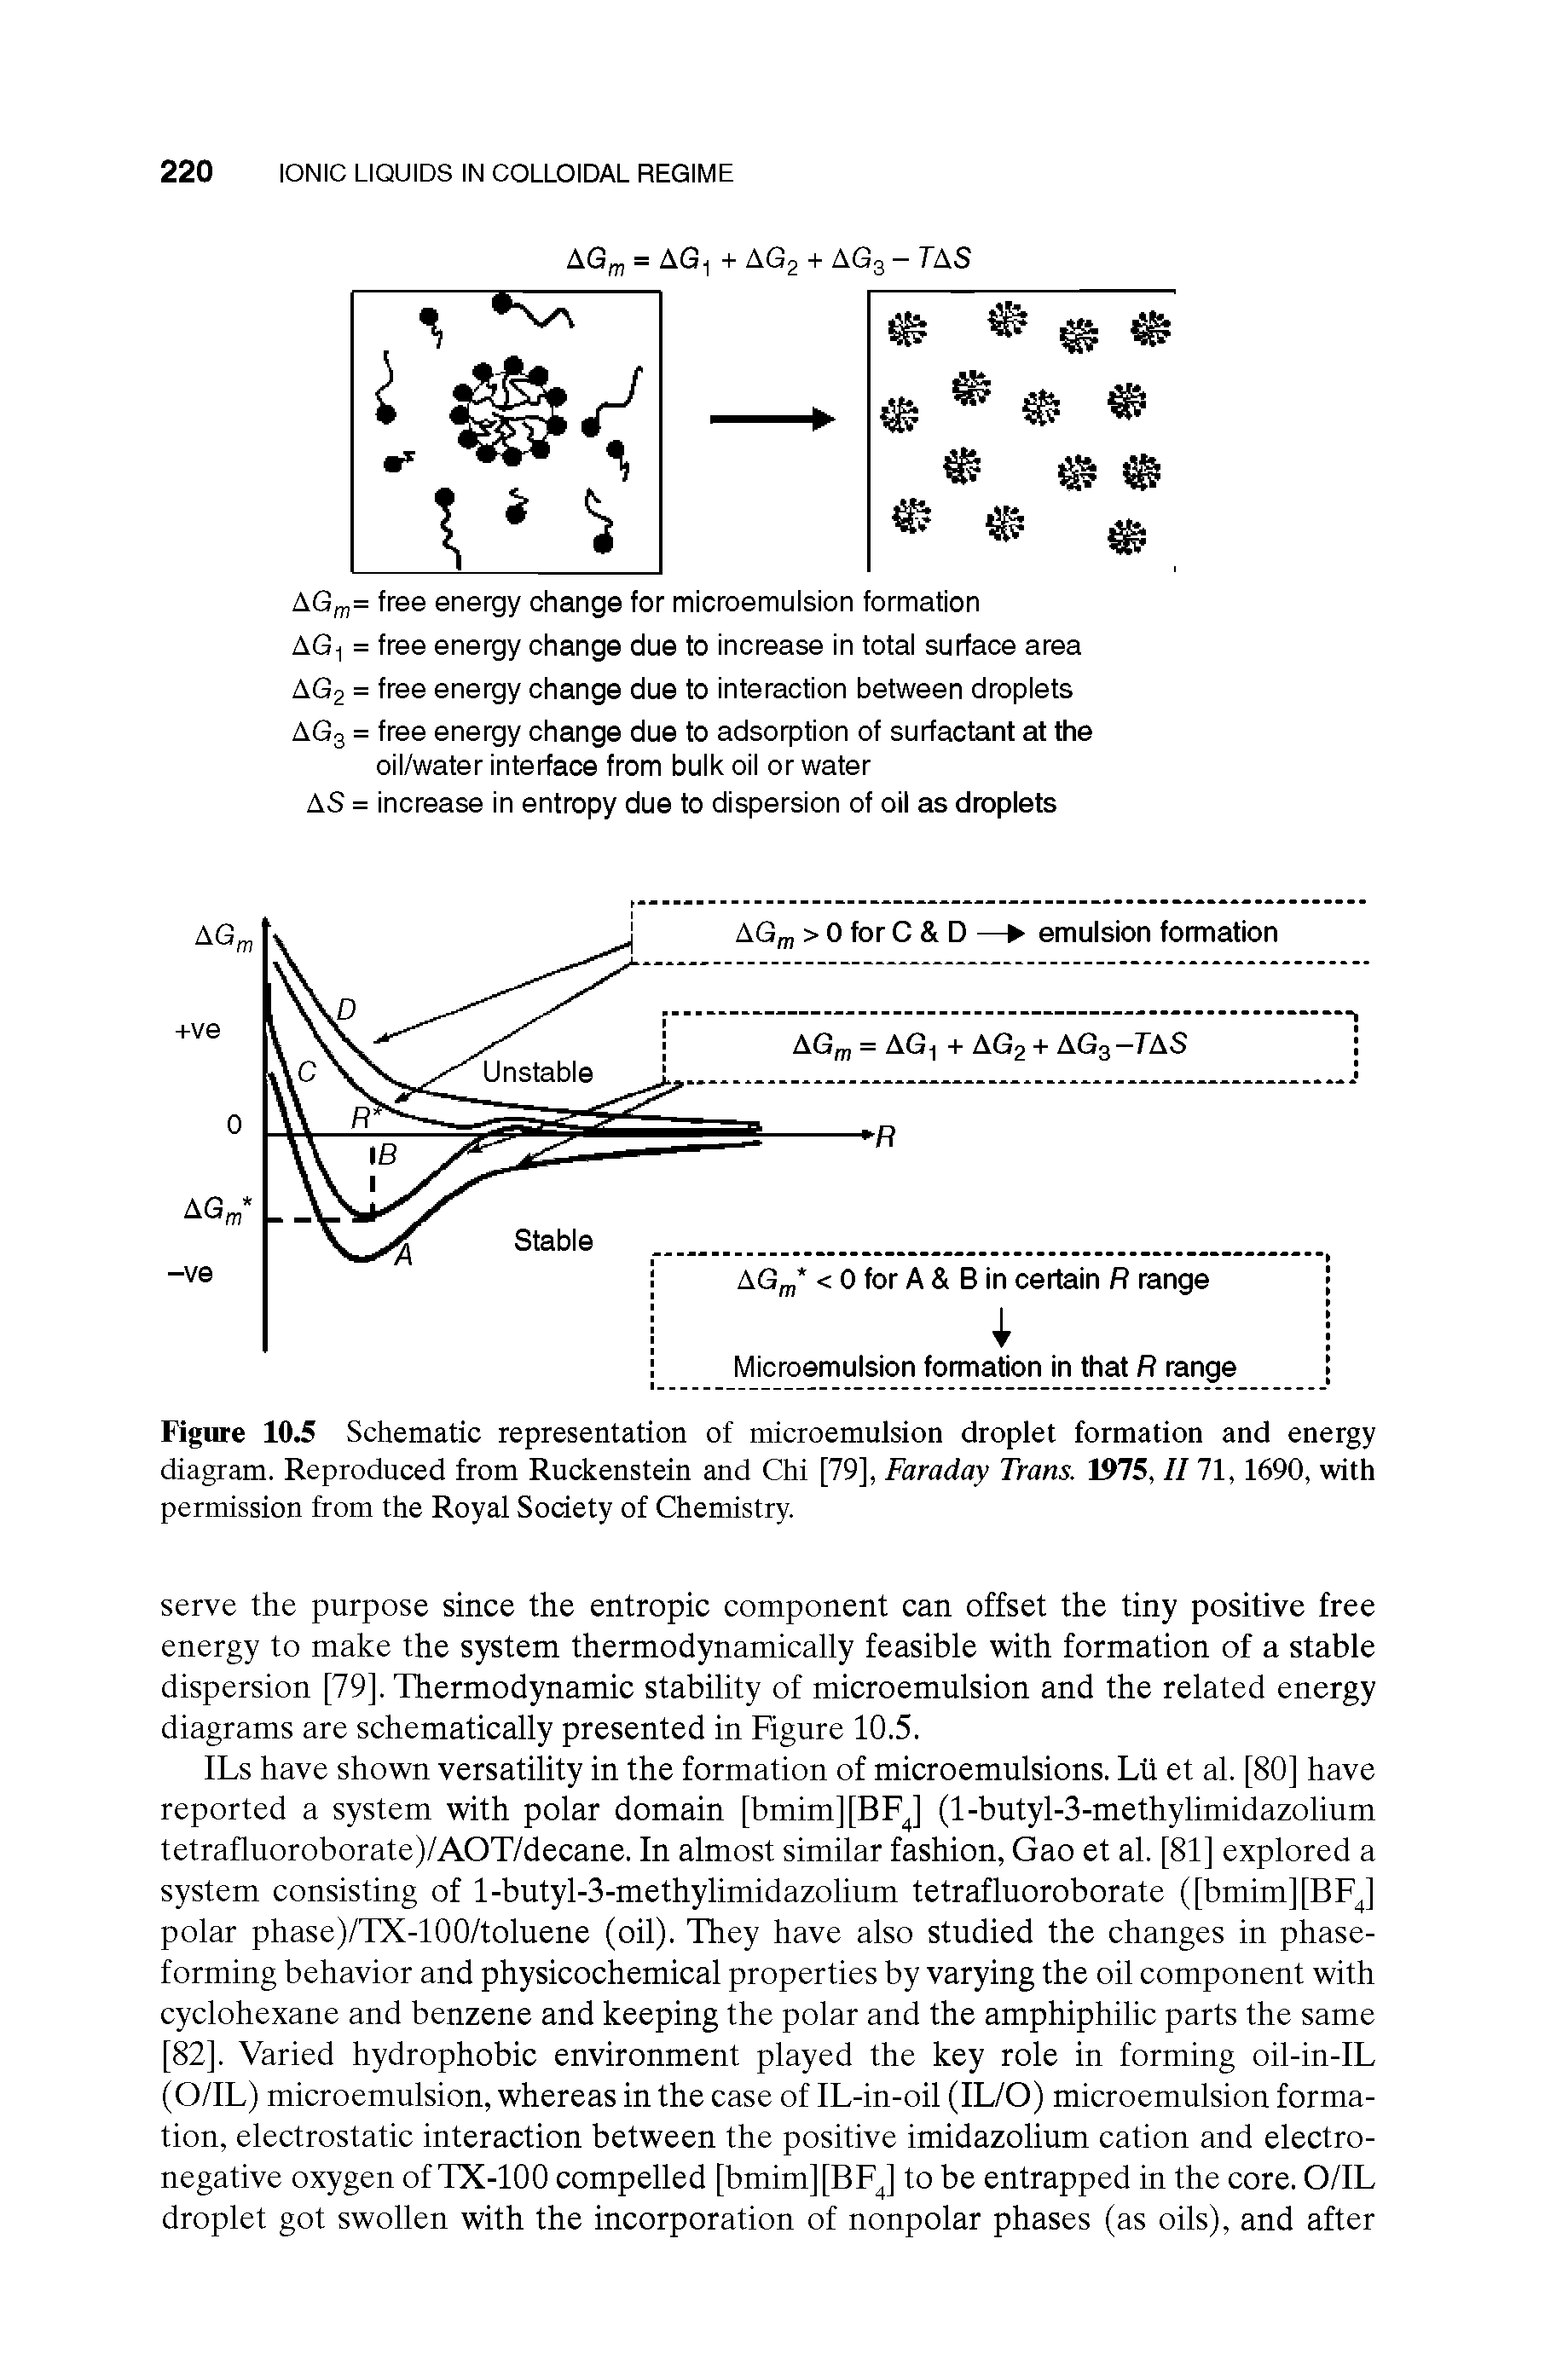 Figure 10.5 Schematic representation of microemulsion droplet formation and energy diagram. Reproduced from Ruckenstein and Chi [79], Faraday Trans. 1975, II71,1690, with permission from the Royal Society of Chemistry.